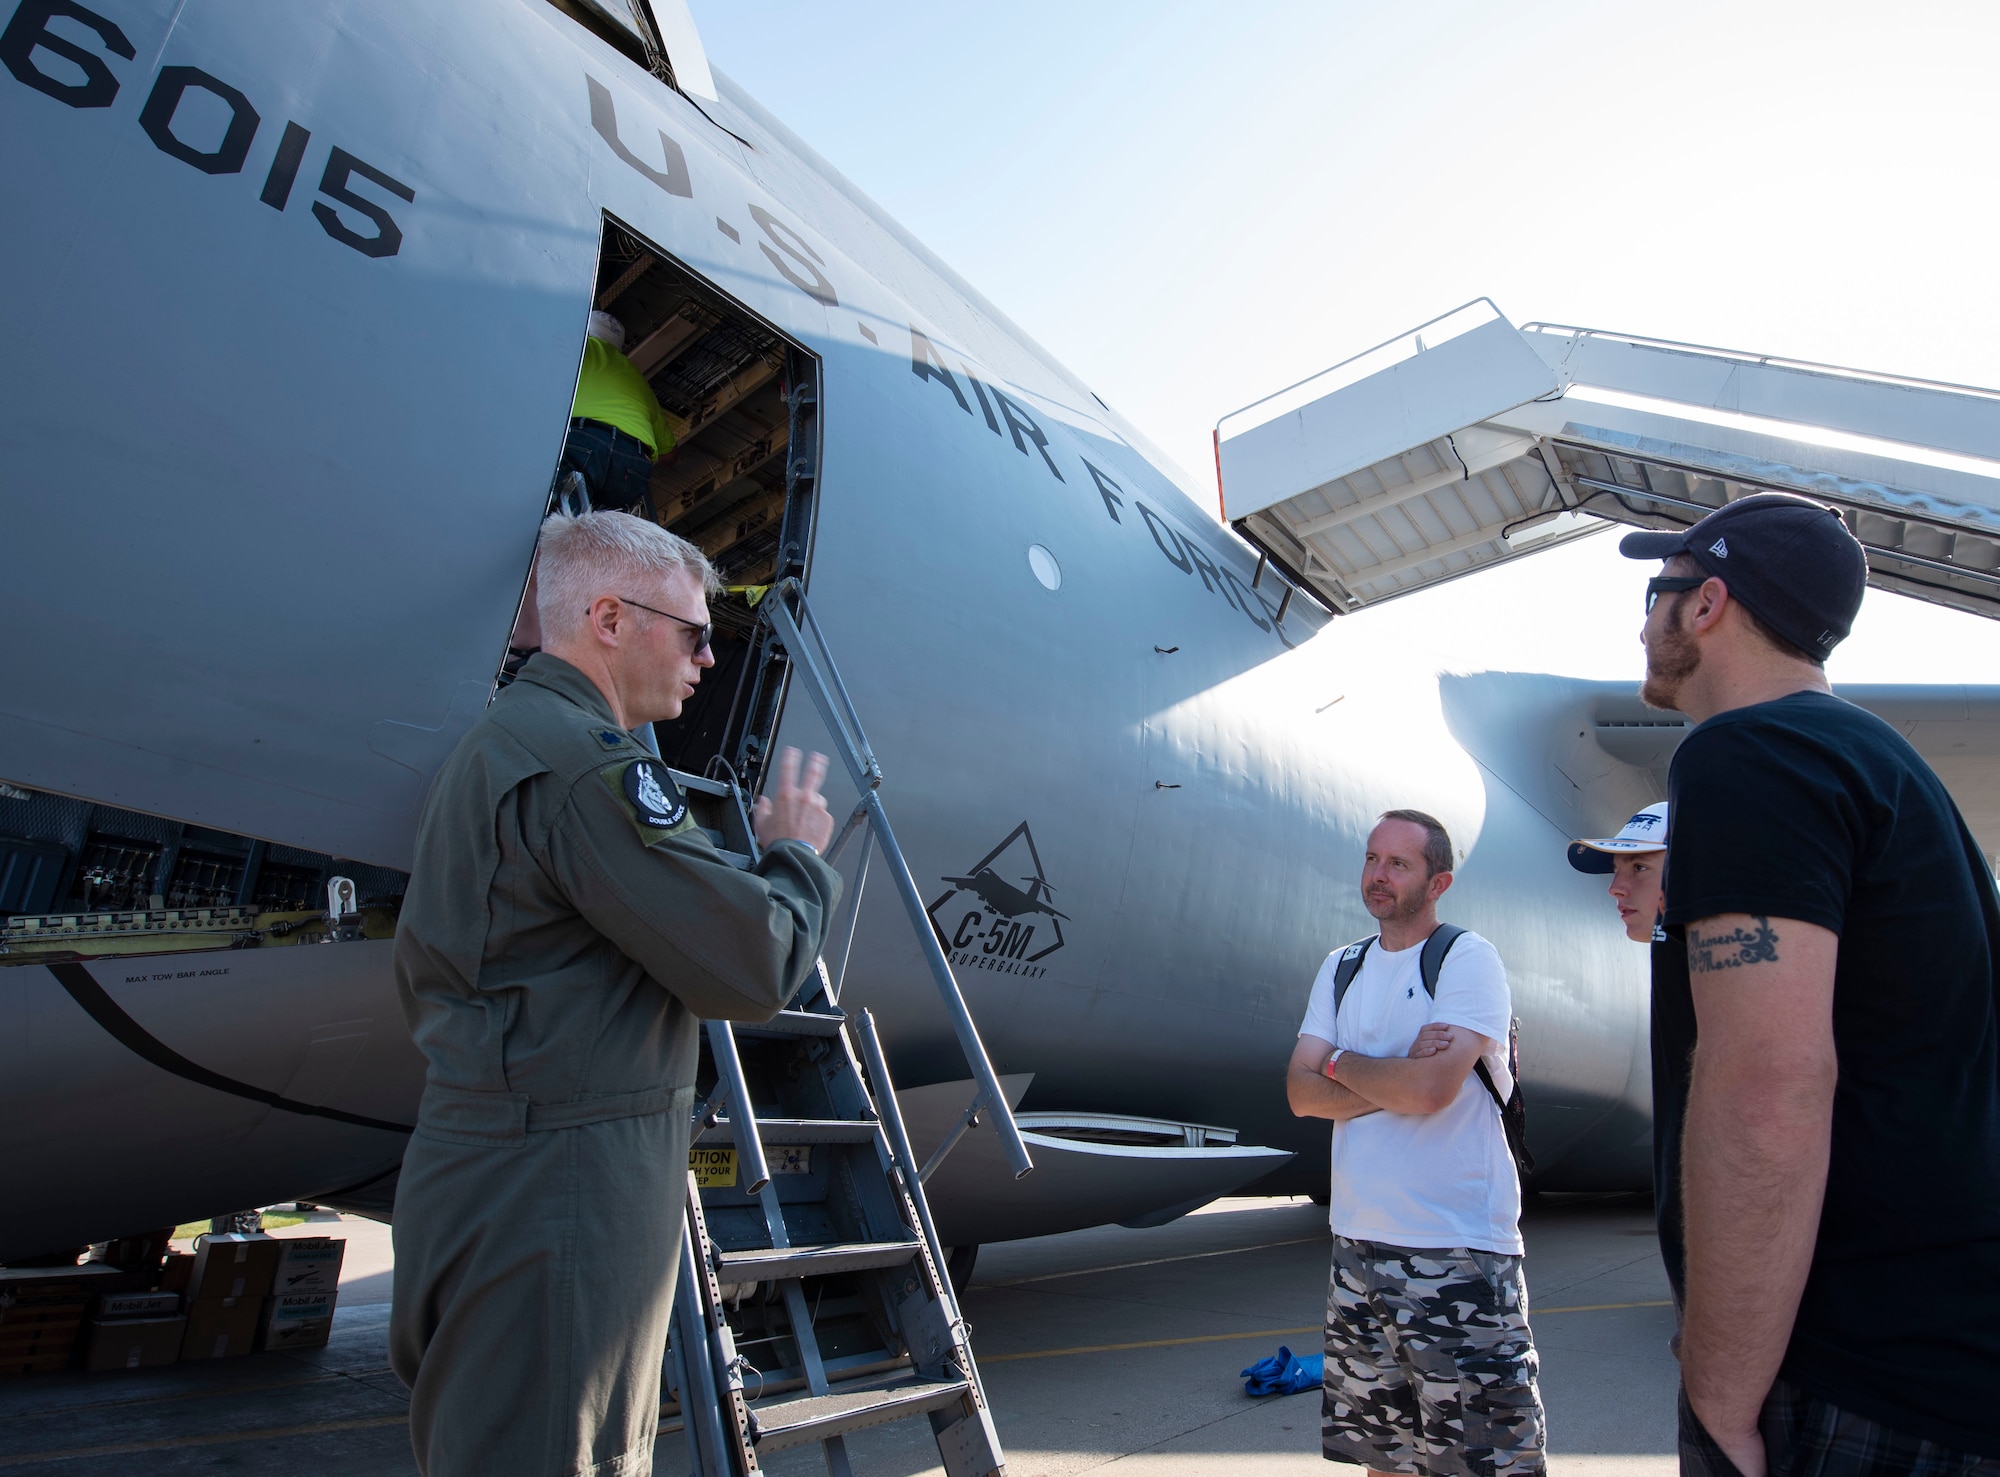 U.S. Air Force Lt. Col. Brian M. Trumble, 22nd Airlift Squadron director of operations and instructor pilot, speaks with aviation enthusiasts about the C-5M Super Galaxy July 27, 2019, at Wittman Regional Airport in Oshkosh, Wisconsin. The C-5 crew went to EAA AirVenture 2019 where more than 500,000 aviation enthusiasts from 80 countries gathered at the air show to celebrate the past, present and future in the world of aviation. (U.S. Air Force photo by Senior Airman Jonathon Carnell)